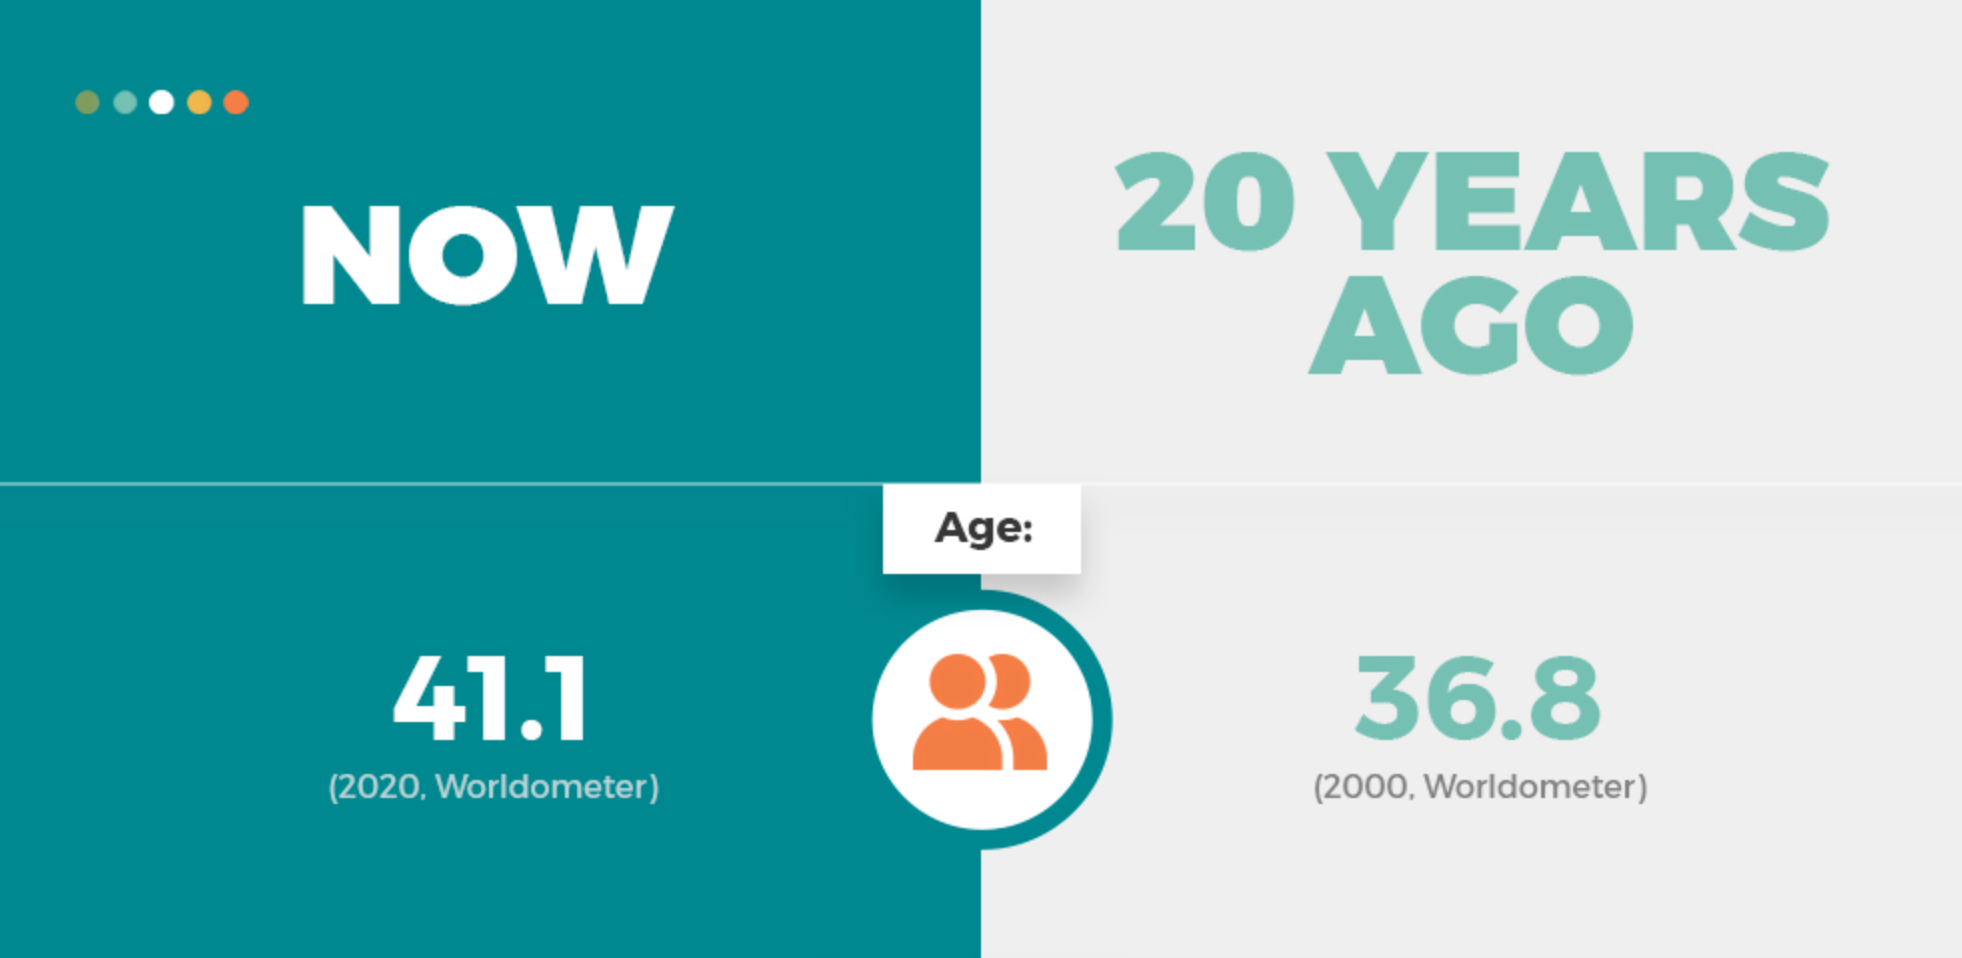 A comparison of the average age in 2020 with the average age in 2000